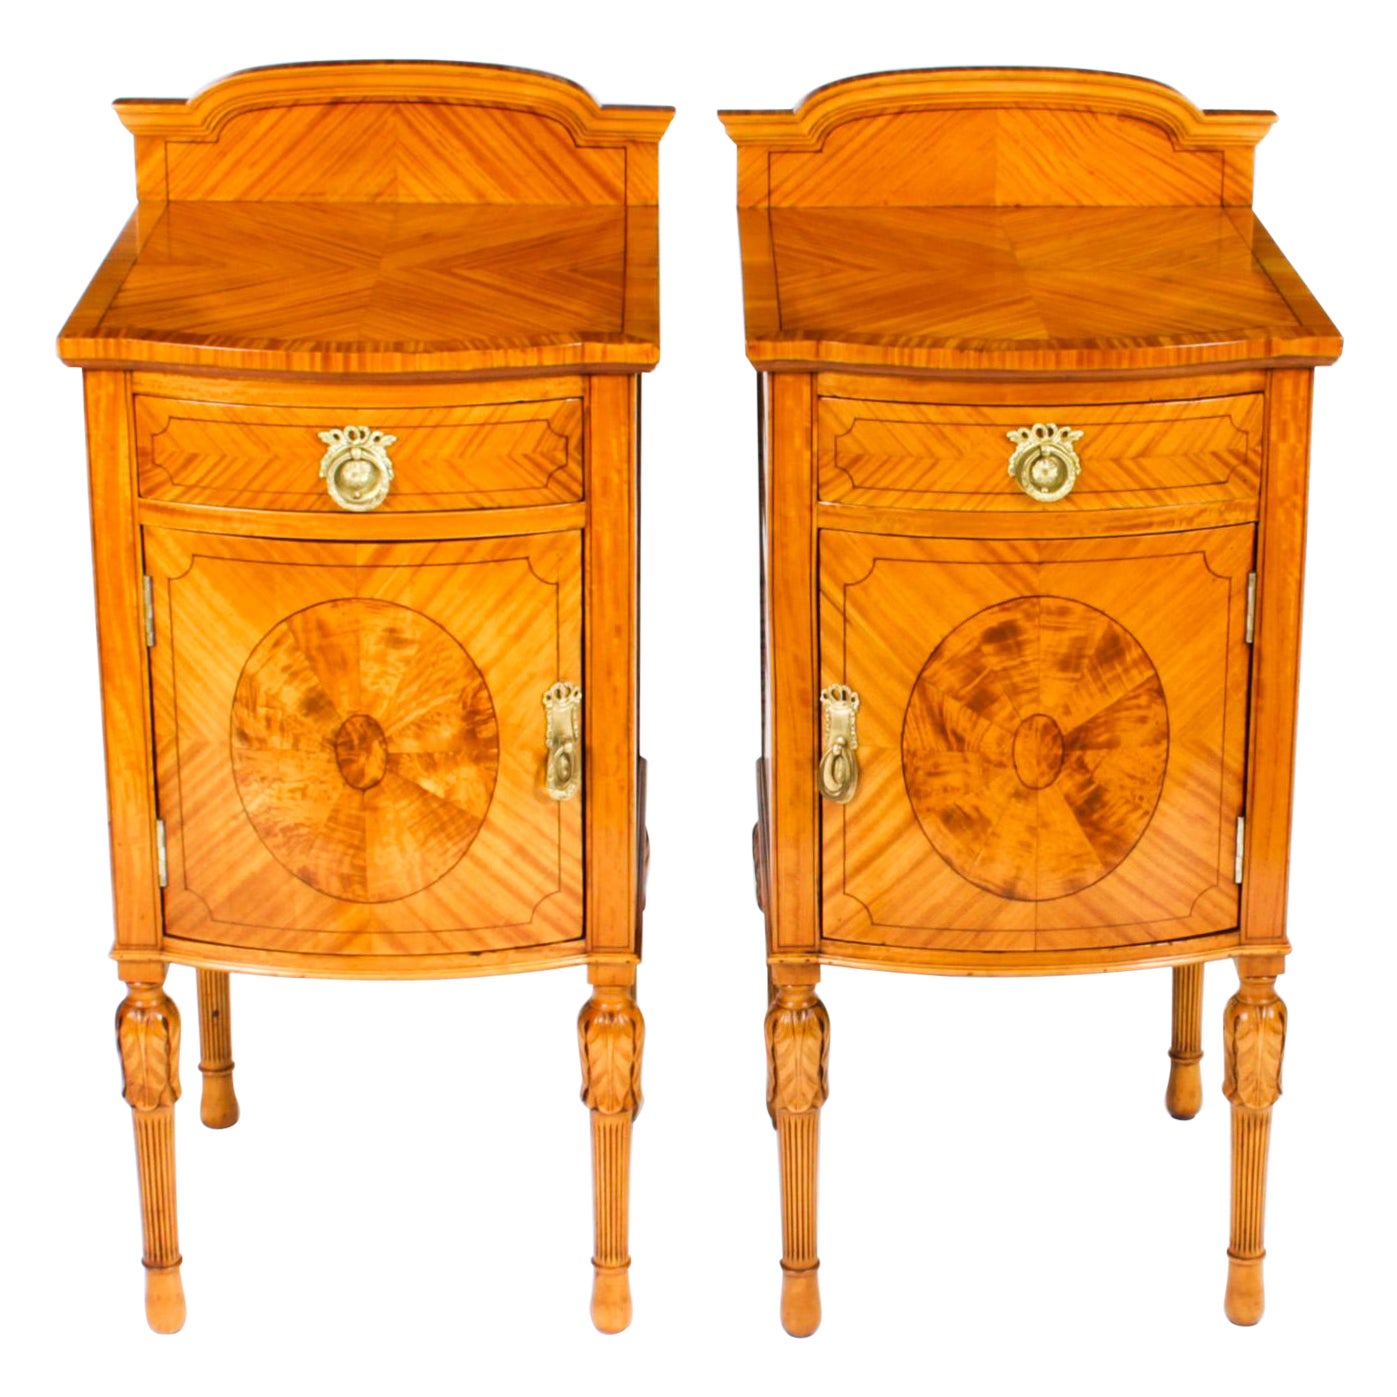 Antique Pair Victorian Satinwood Bedside Cabinets 19th C